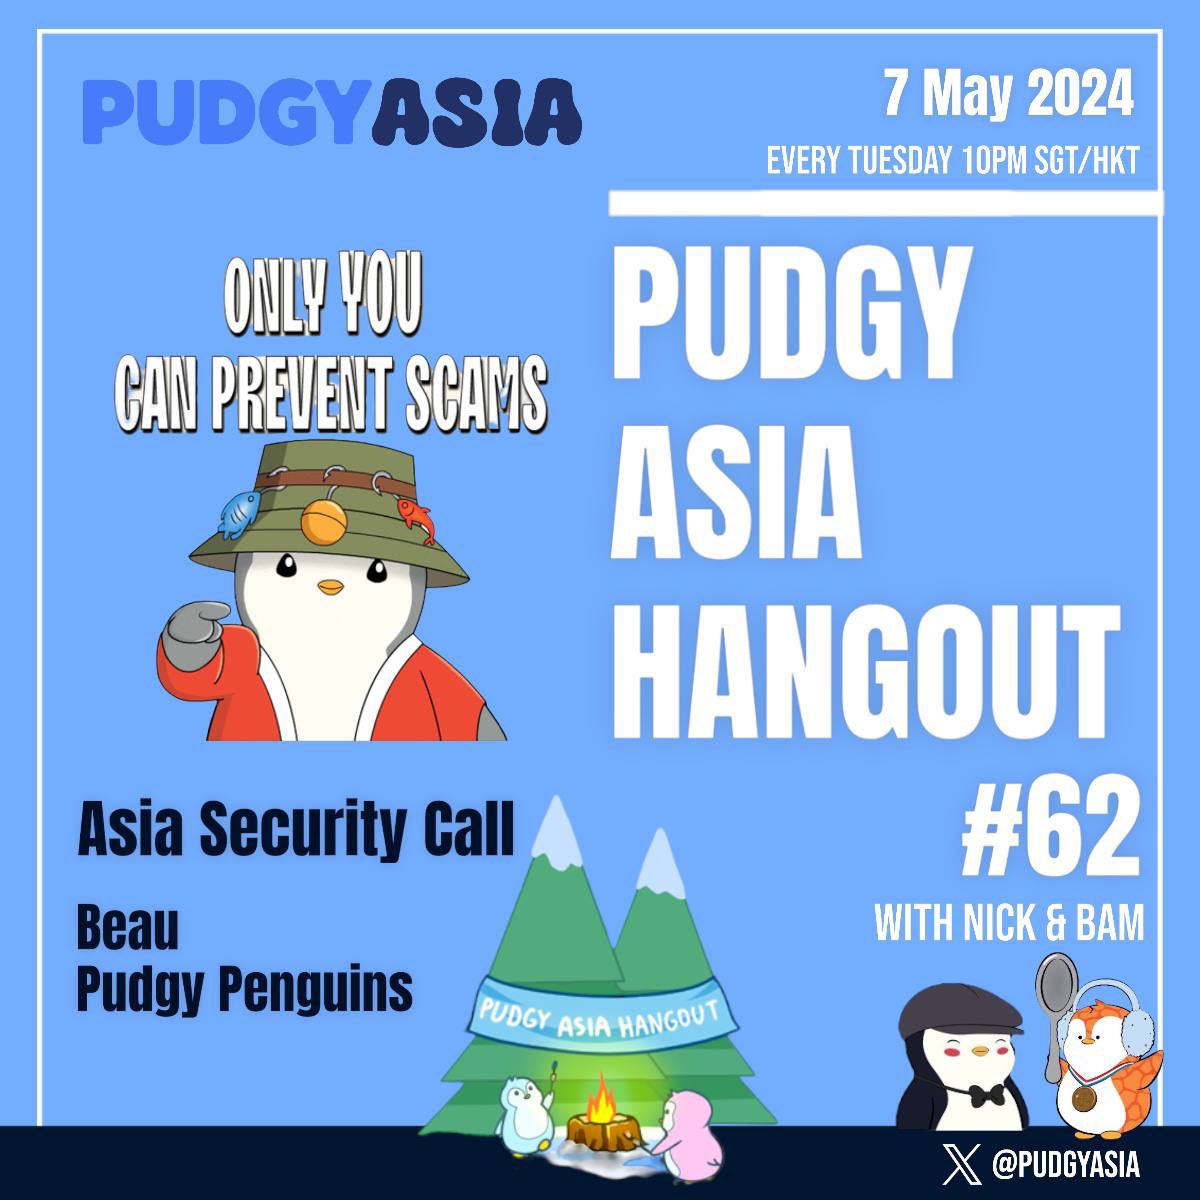 It’s time for our Asia Security Call with @beausecurity for a safety and security update 🤝 Remember, only YOU can prevent scams. Set your reminders👇🏼: twitter.com/i/spaces/1PlJQ…